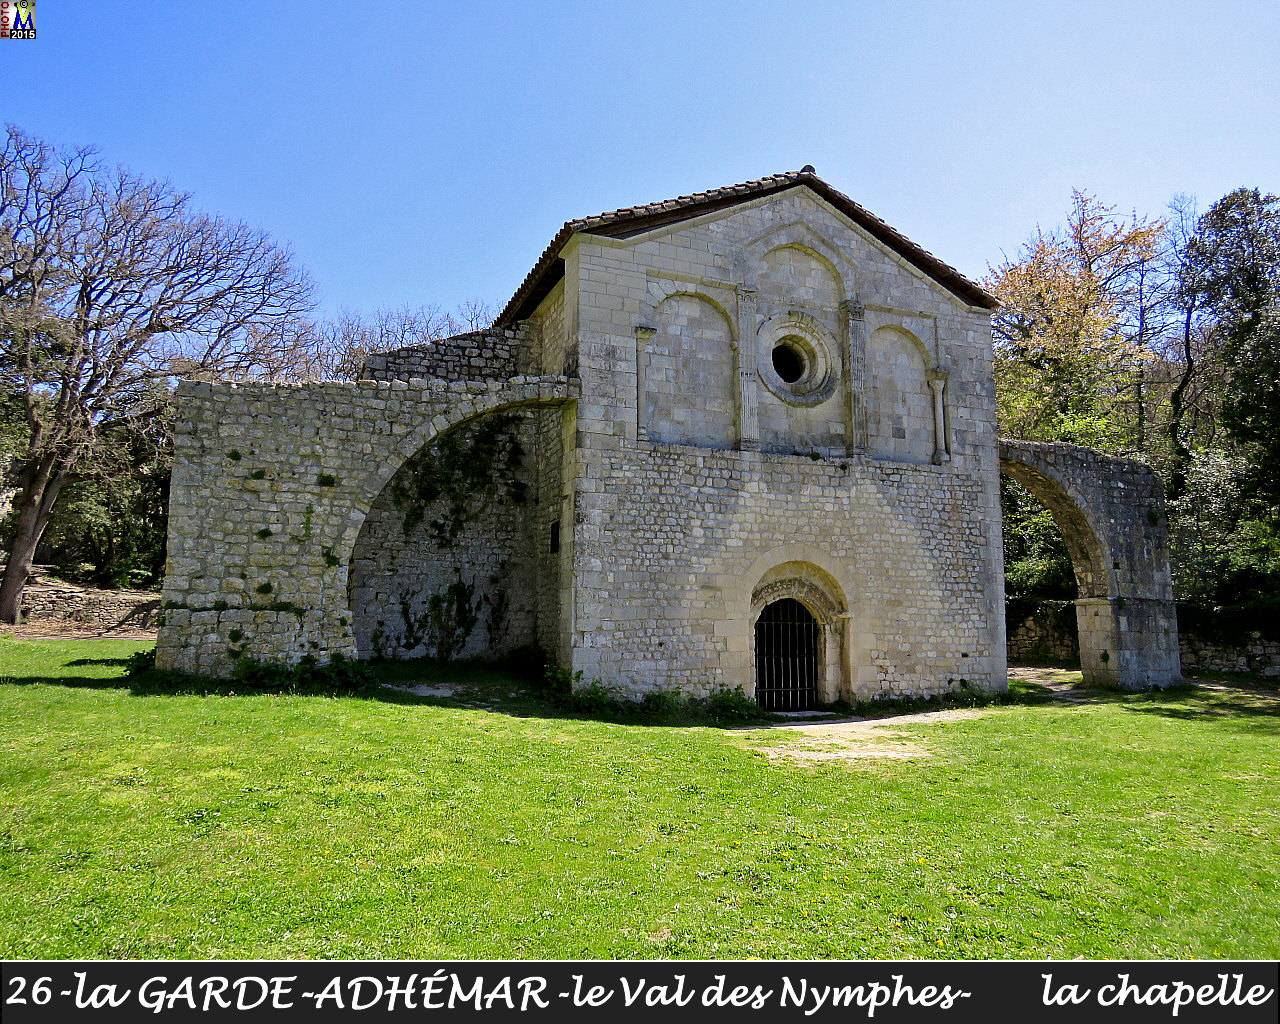 26GARDE-ADHEMARzVAL-NYMPHES_chapelle_102.jpg